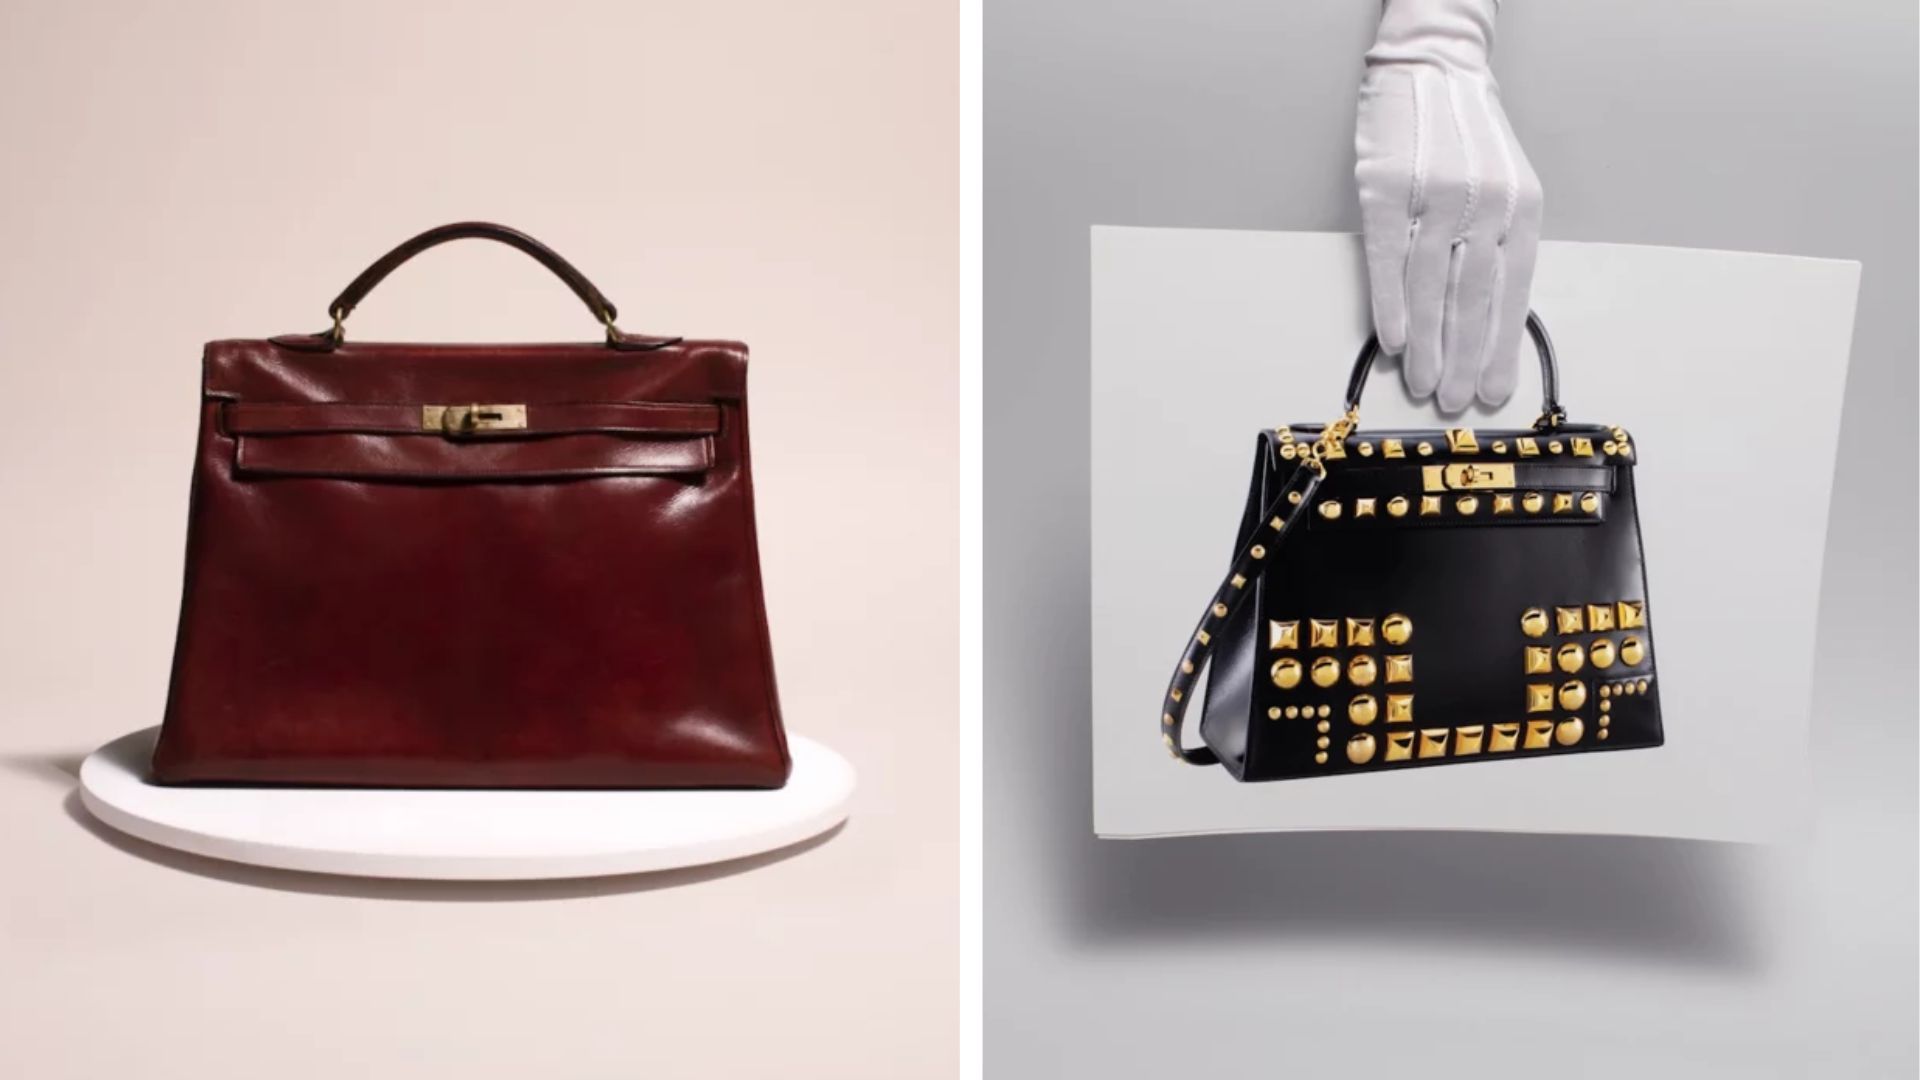 Designer Bags With Interesting Stories Behind Them